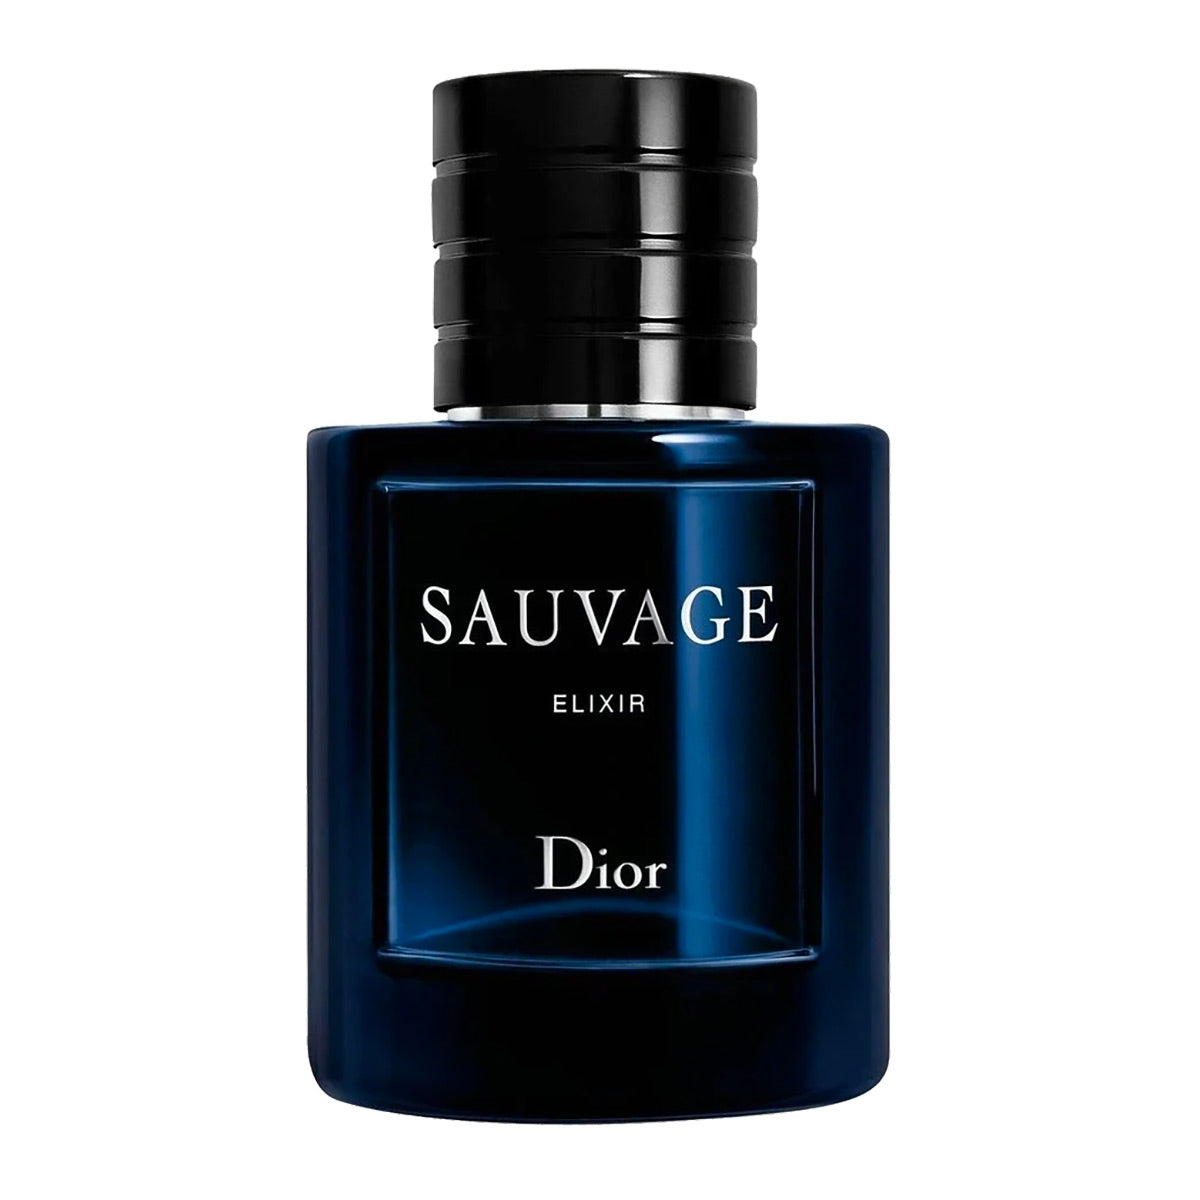 Dior Sauvage Elixir For Men Trial Size 7.5 ml